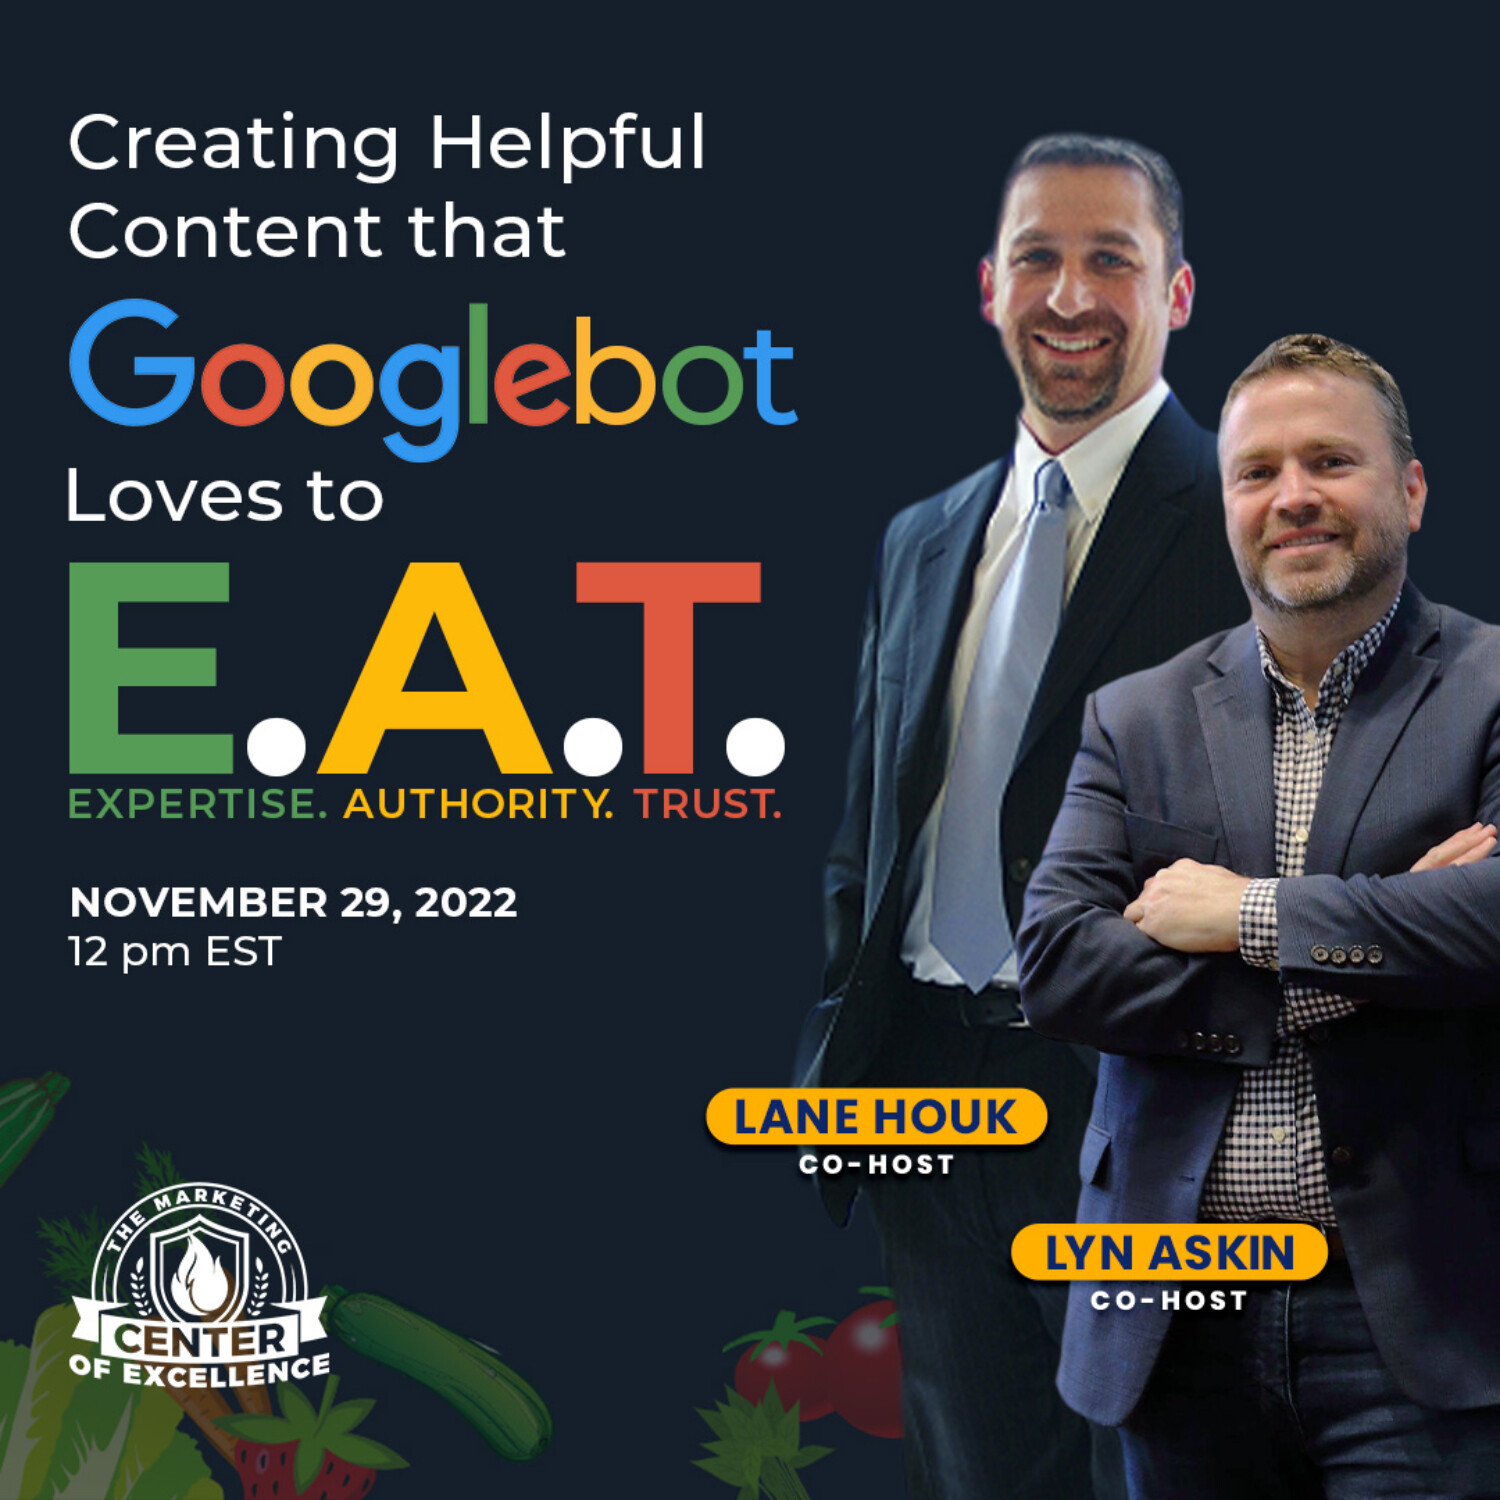 November MCOE Masterclass - Creating Killer Content that your Audience and Googlebot will EAT Up